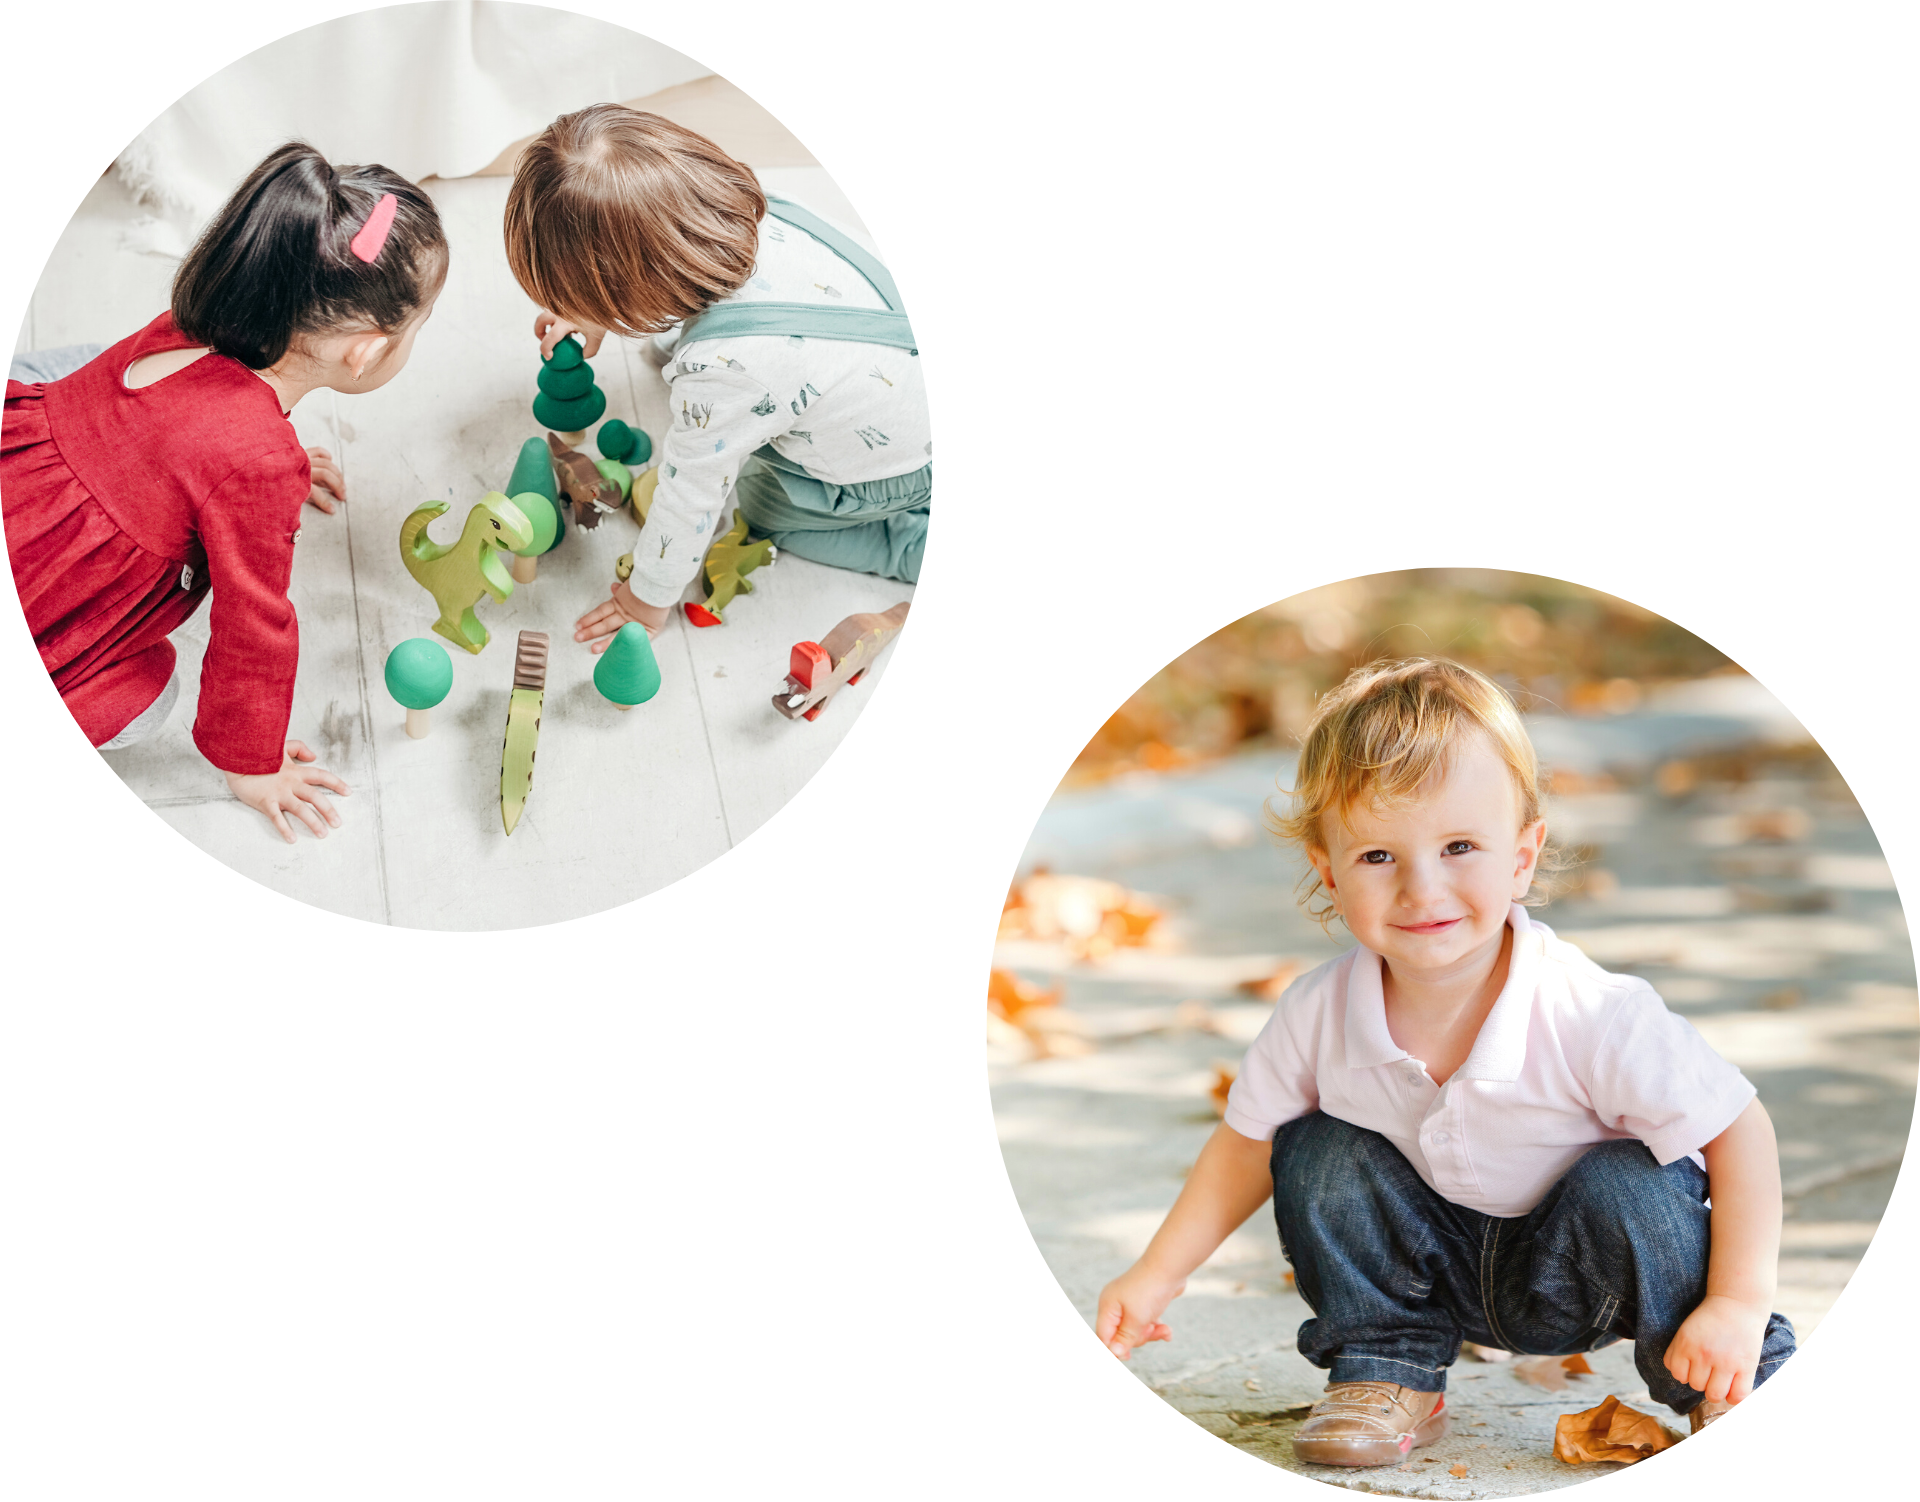 Two circular images of two toddlers playing with wooden toys in a nursery and a toddler squatting and smiling outside